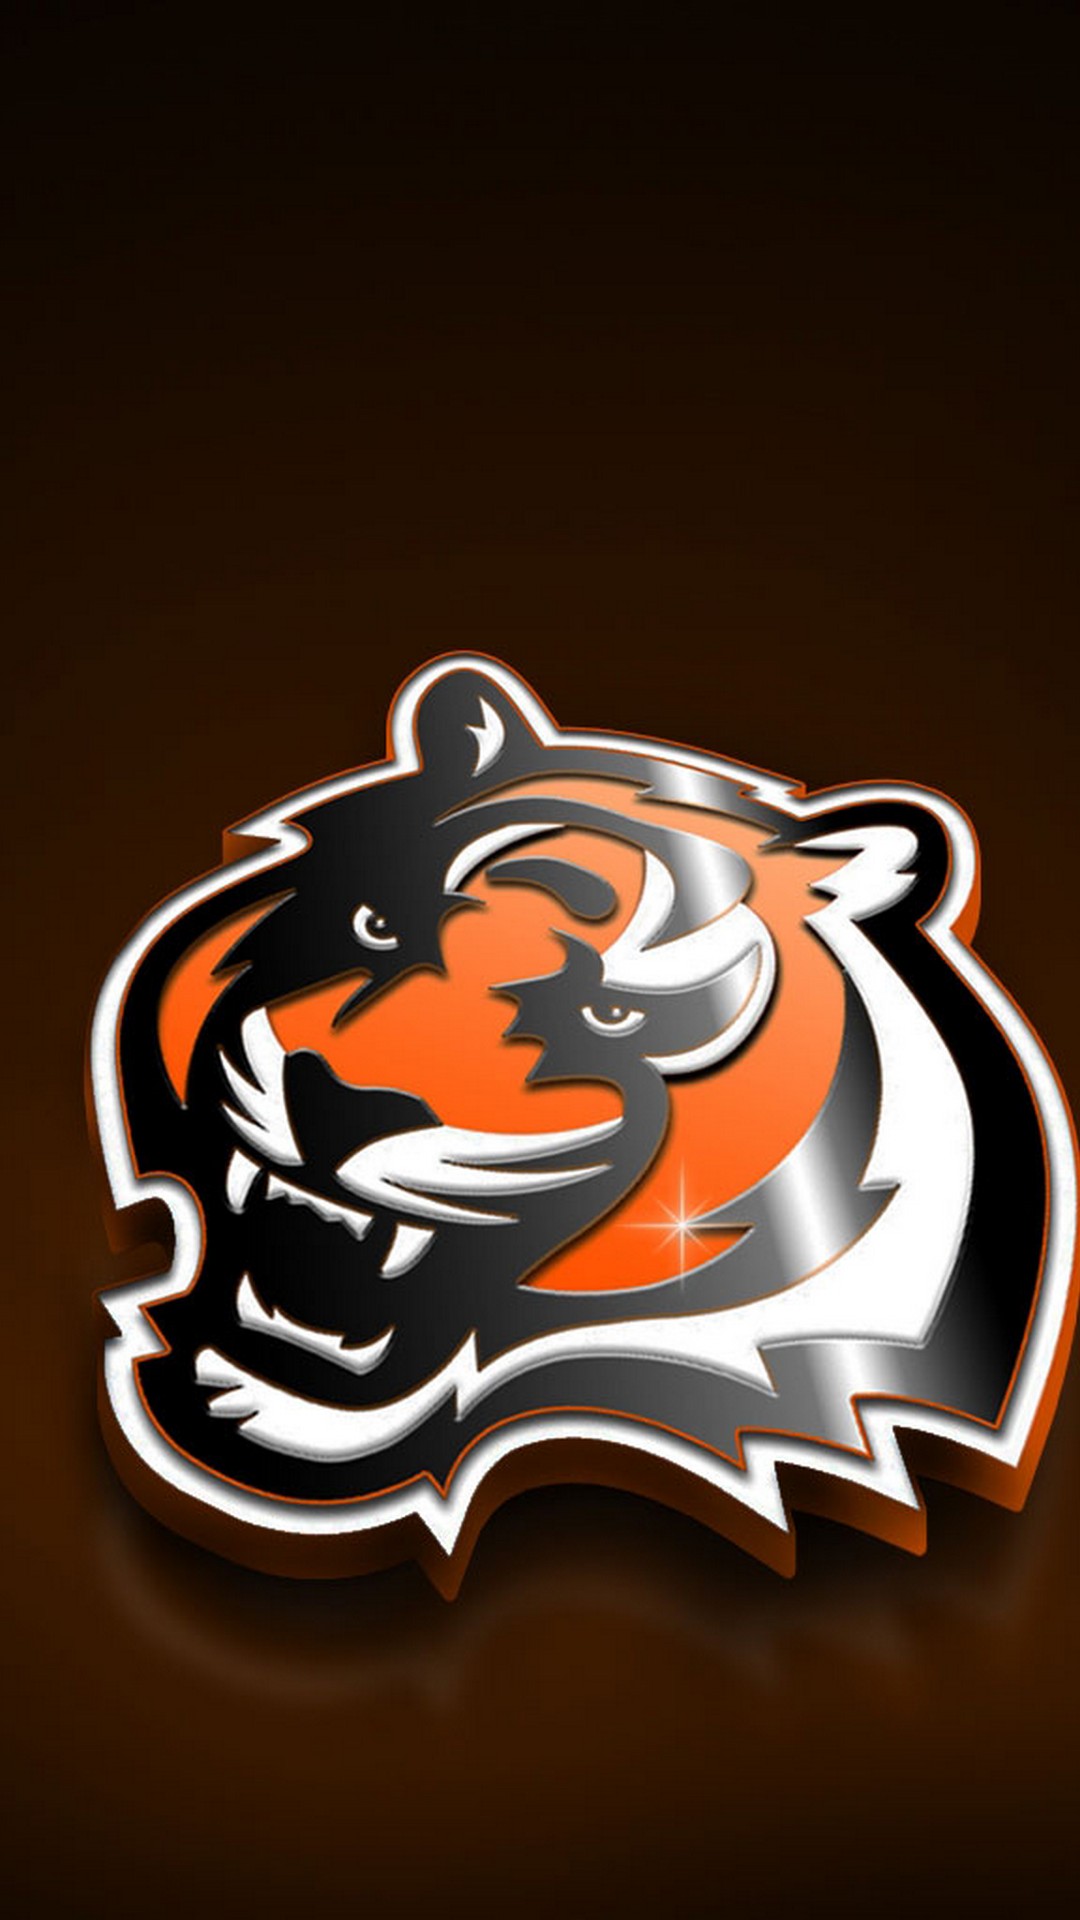 Cincinnati Bengals iPhone Wallpaper Home Screen with high-resolution 1080x1920 pixel. Download and set as wallpaper for Apple iPhone X, XS Max, XR, 8, 7, 6, SE, iPad, Android